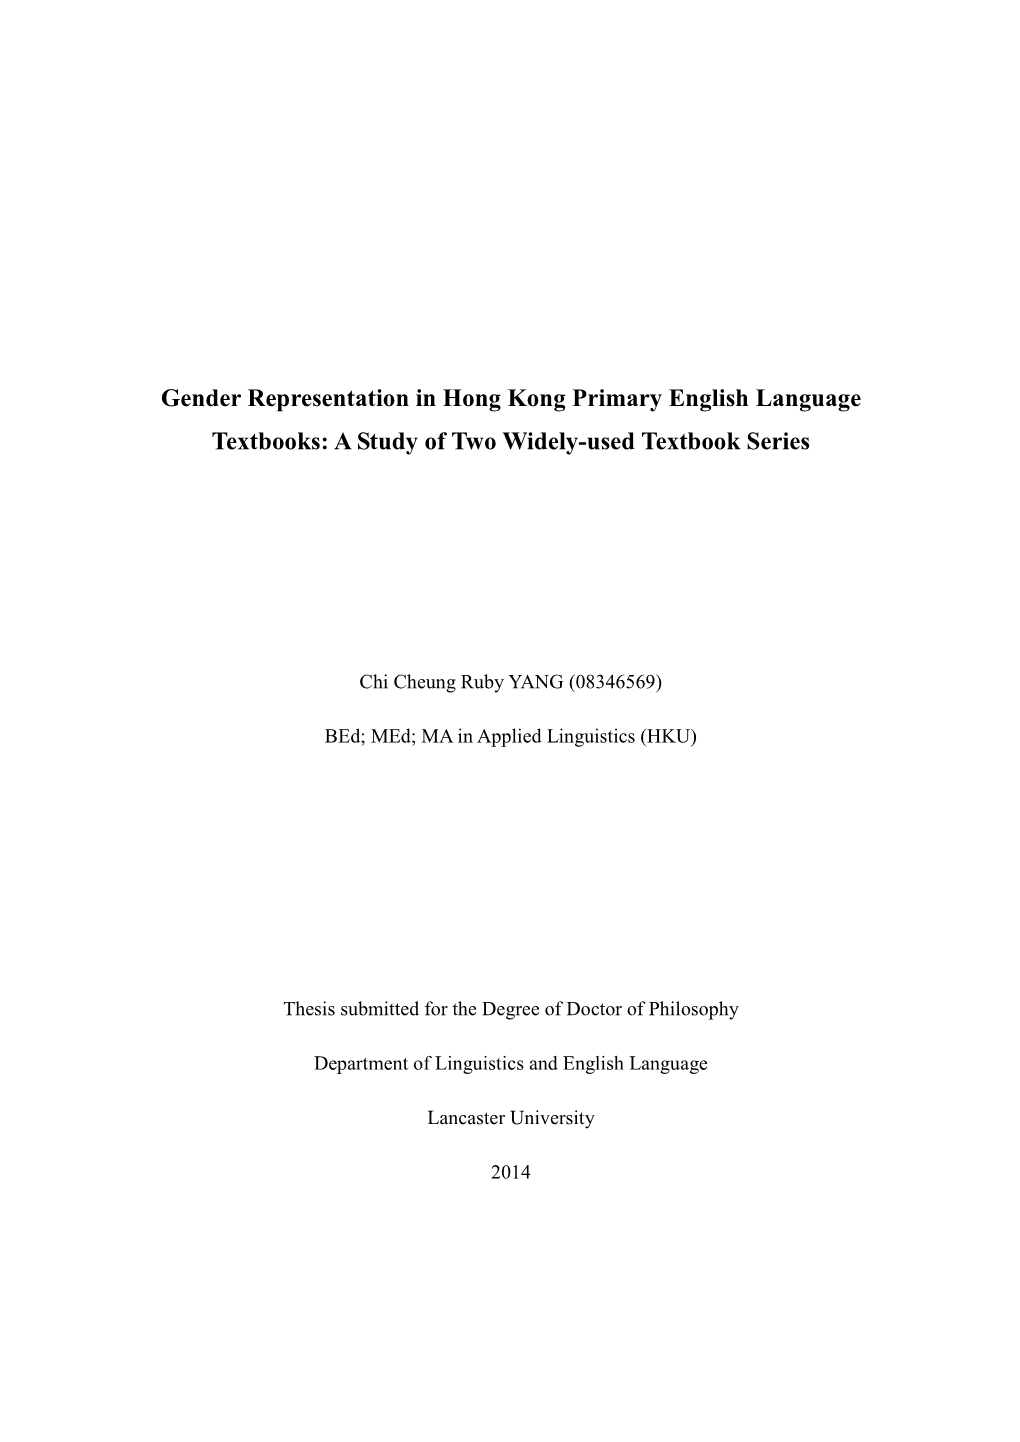 Gender Representation in Hong Kong Primary English Language Textbooks: a Study of Two Widely-Used Textbook Series